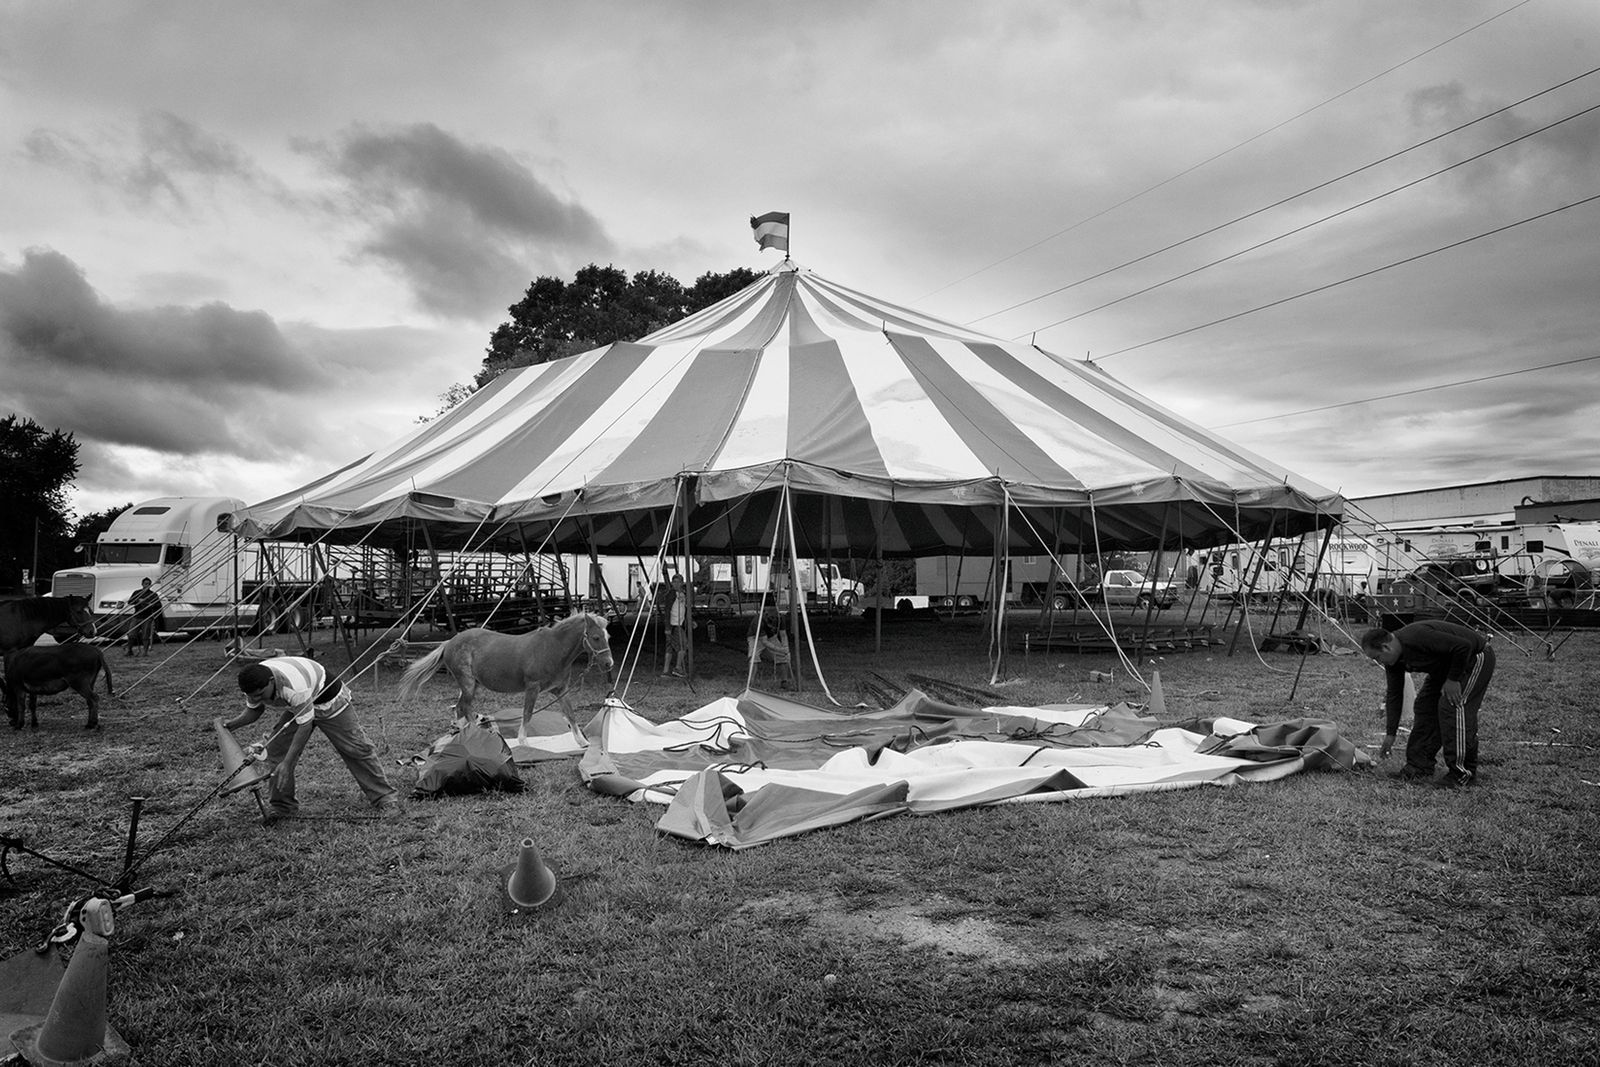 © Lieh Sugai - Workers pack up the tent after the show –the circus moves to the next destination.